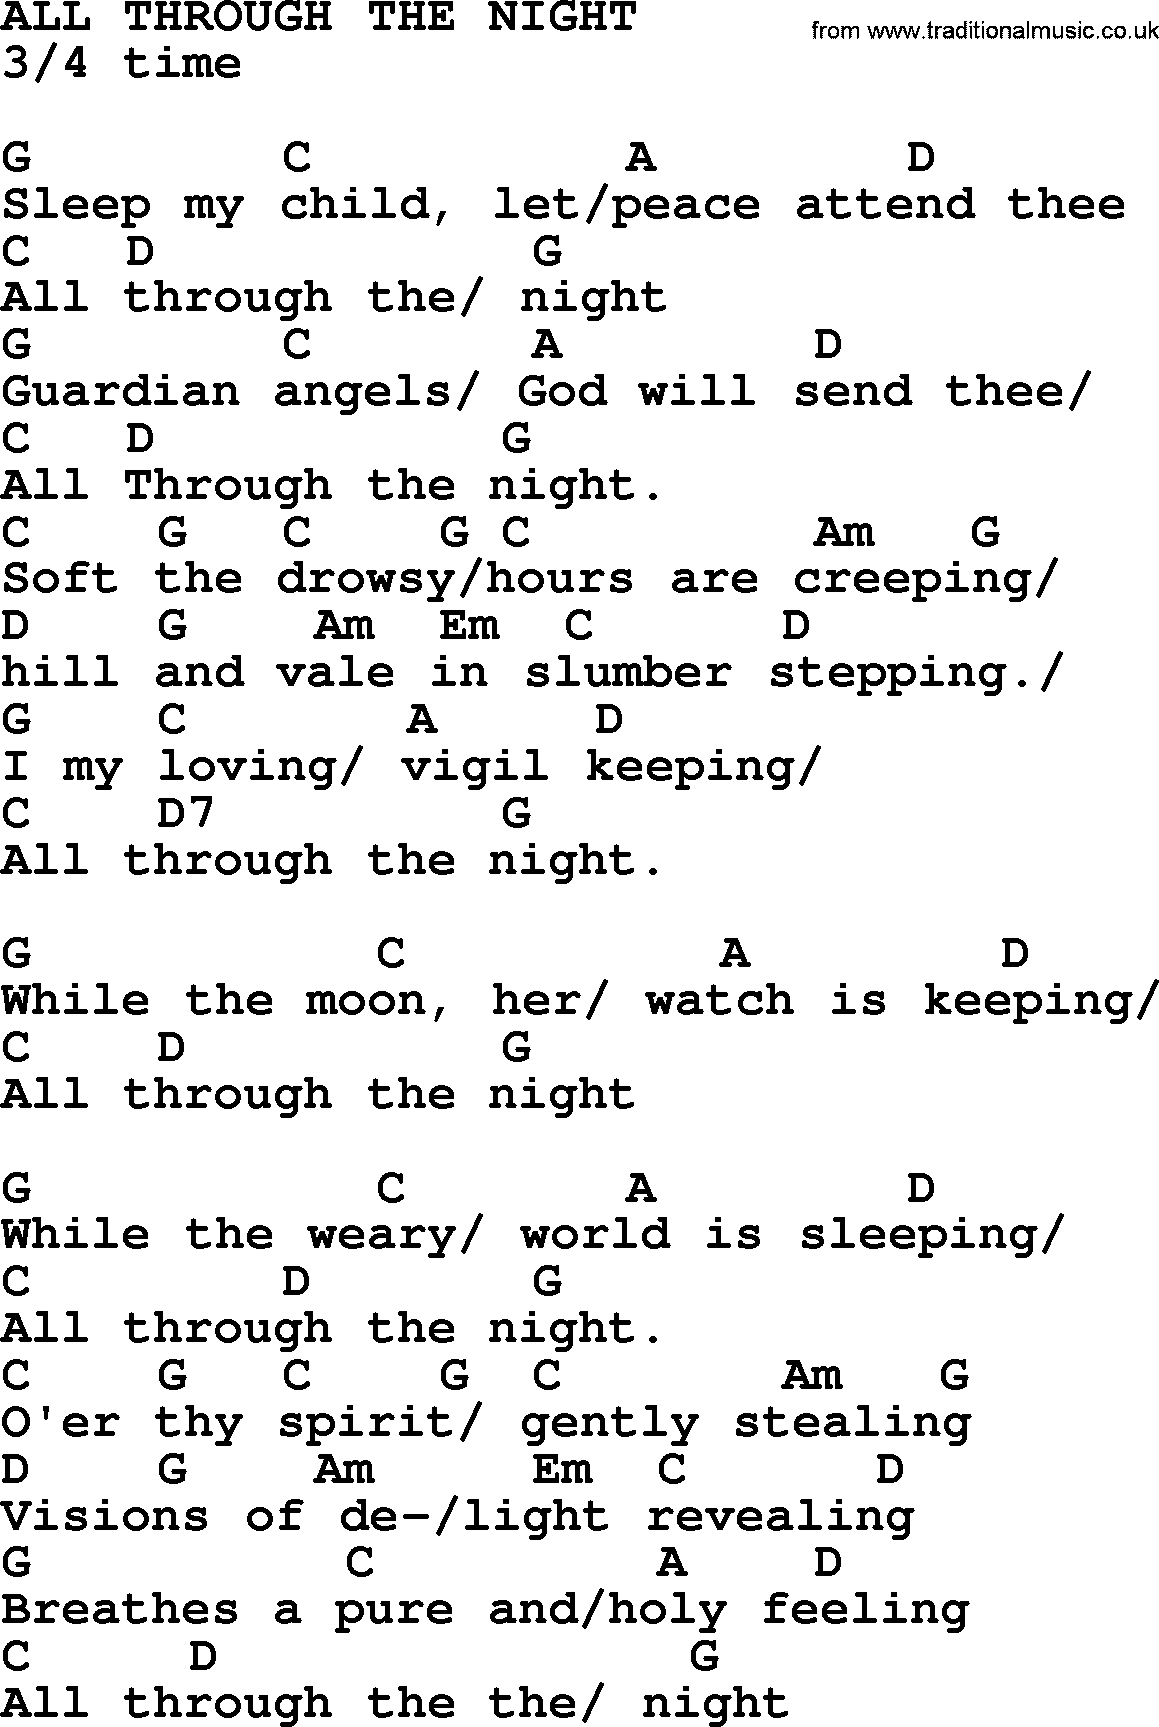 Top 1000 Most Popular Folk and Old-time Songs: All Through The Night, lyrics and chords